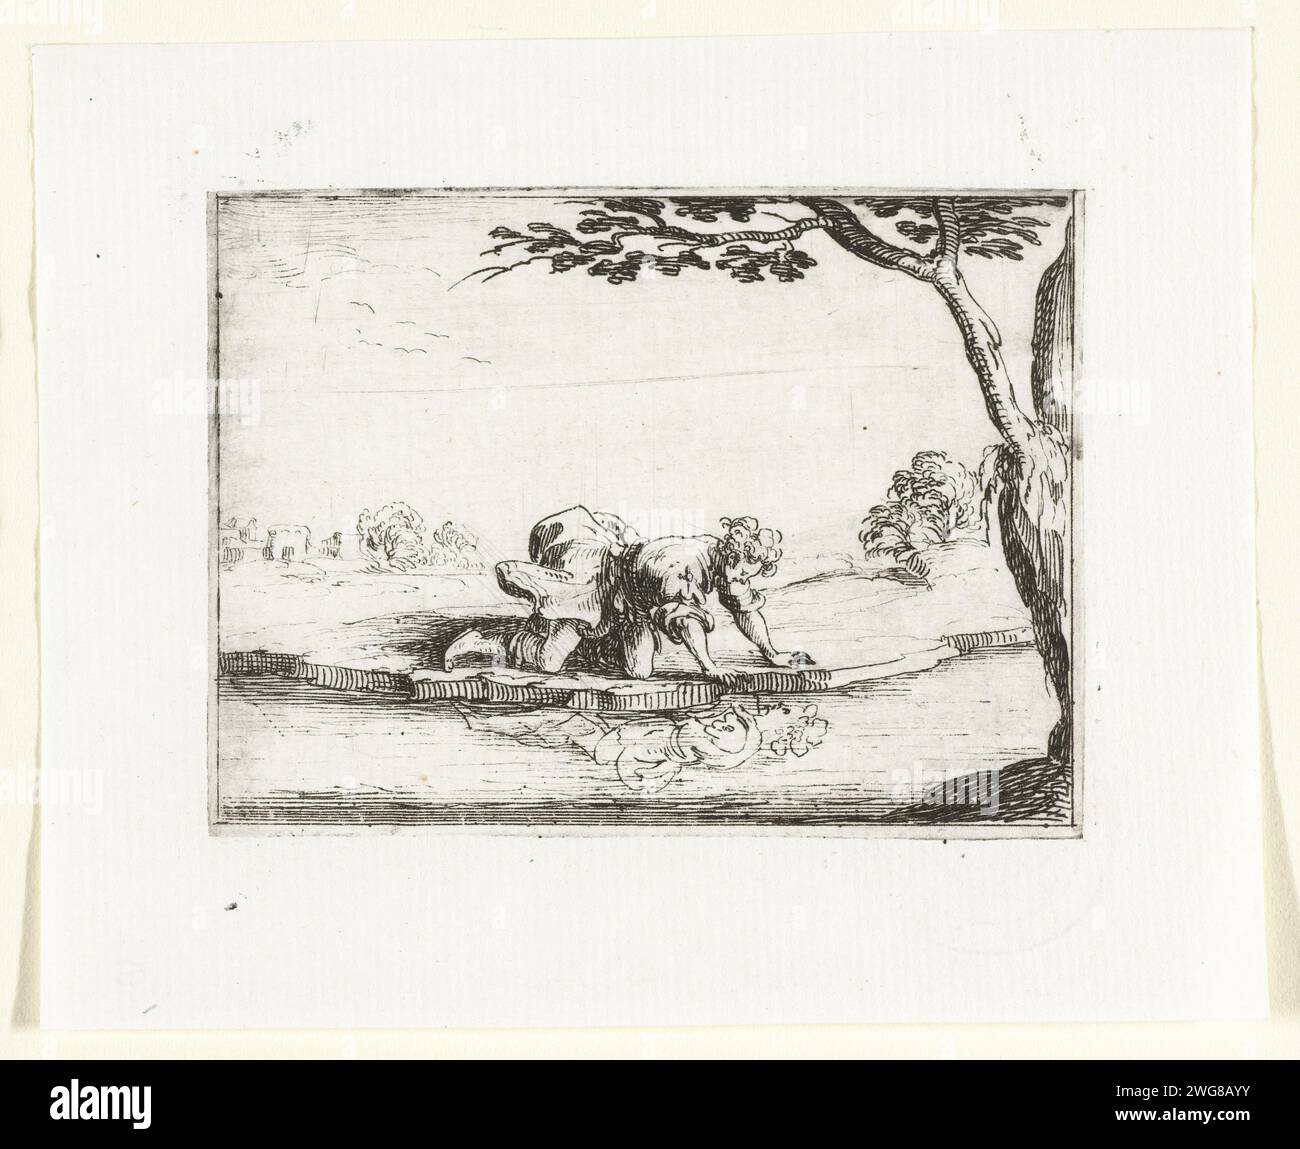 Narcissus admires his mirror image in the water, Jacques Callot, 1621 - 1635 print Presentation of a young man (Narcissus) who looks at his own mirror image at a waterfront. This magazine is part of the emblem series 'Monastic Life in Emblemen'. In addition to an illustrated title page and 26 emblems, the second state of this series is a title page and a magazine with assignment, both in book print without image. Nancy paper etching Narcissus, gazing in a fountain, falls in love with his own reflection; possibly the nymph Echo peeps at the scene Stock Photo